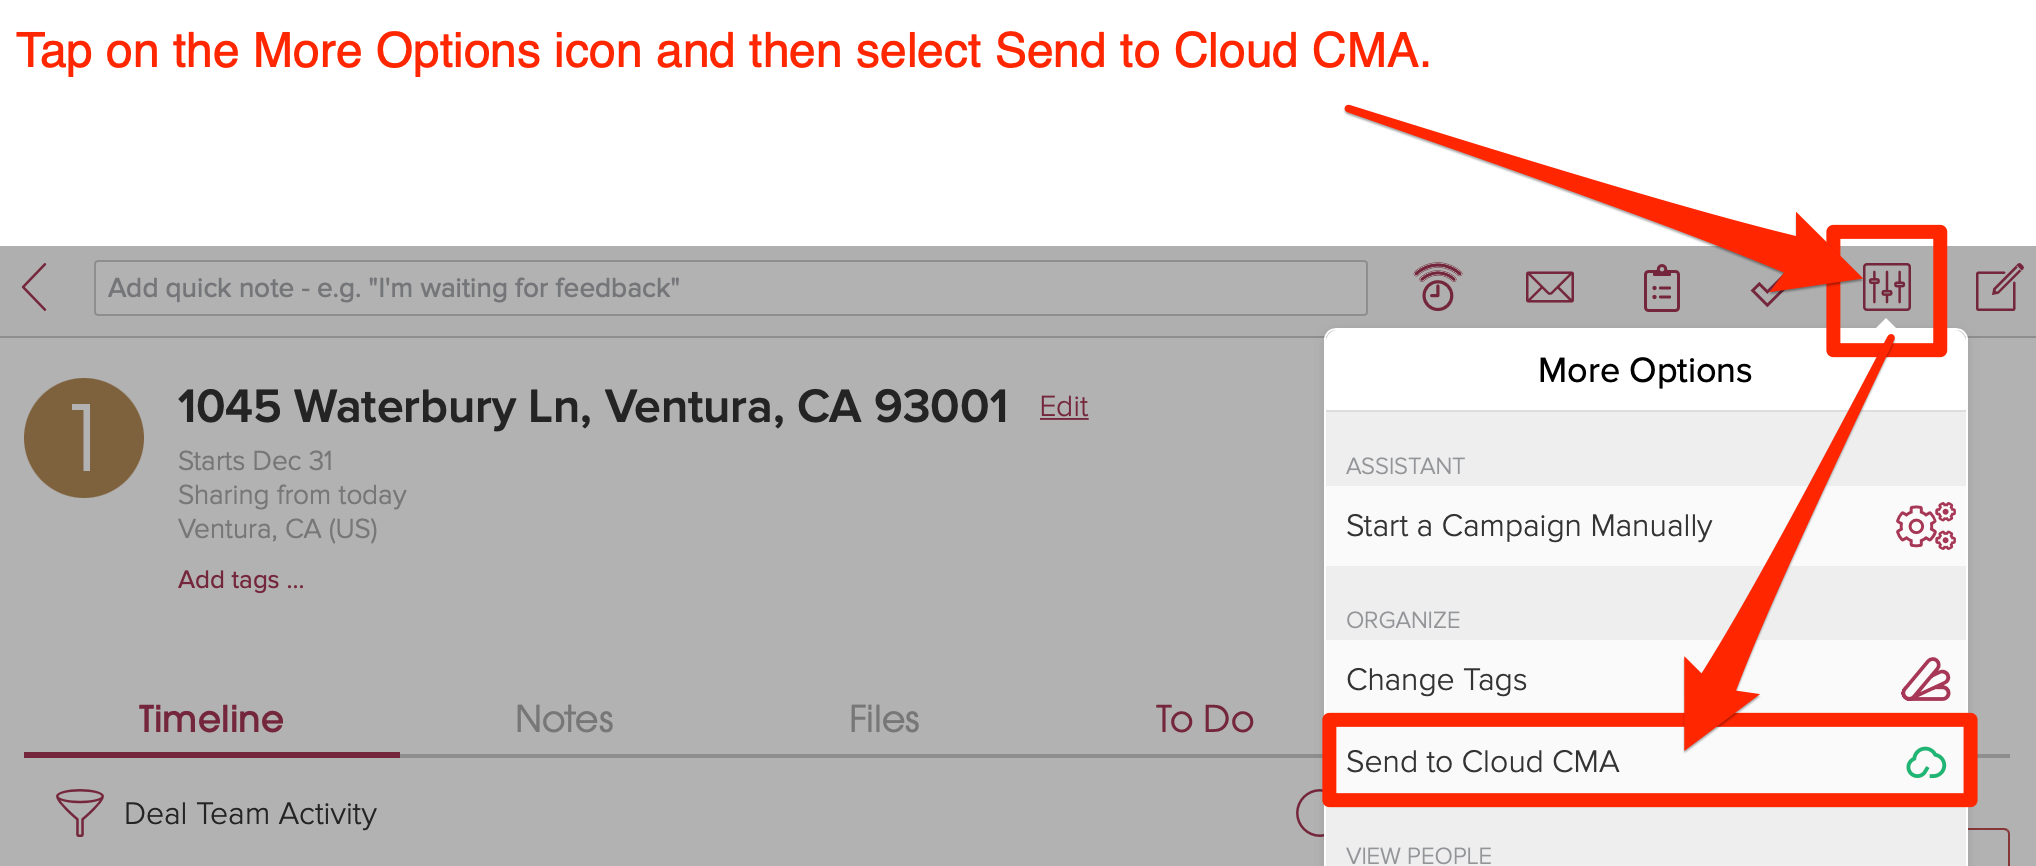 Tap on more options and select send to Cloud CMA. 